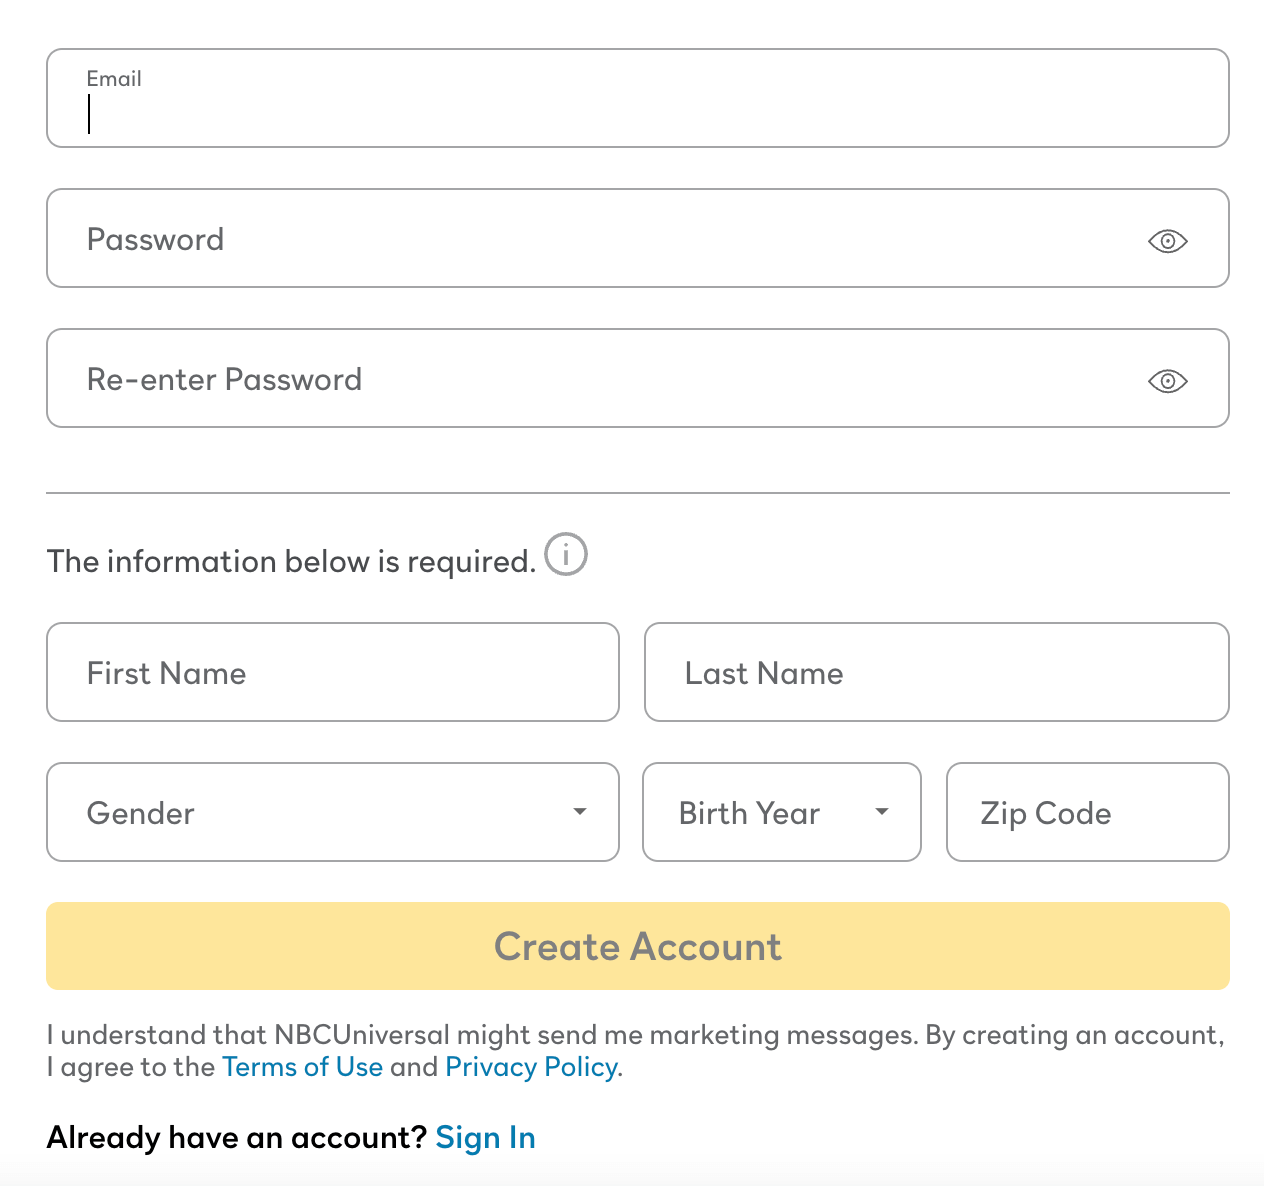 enter all the details and click Create Account